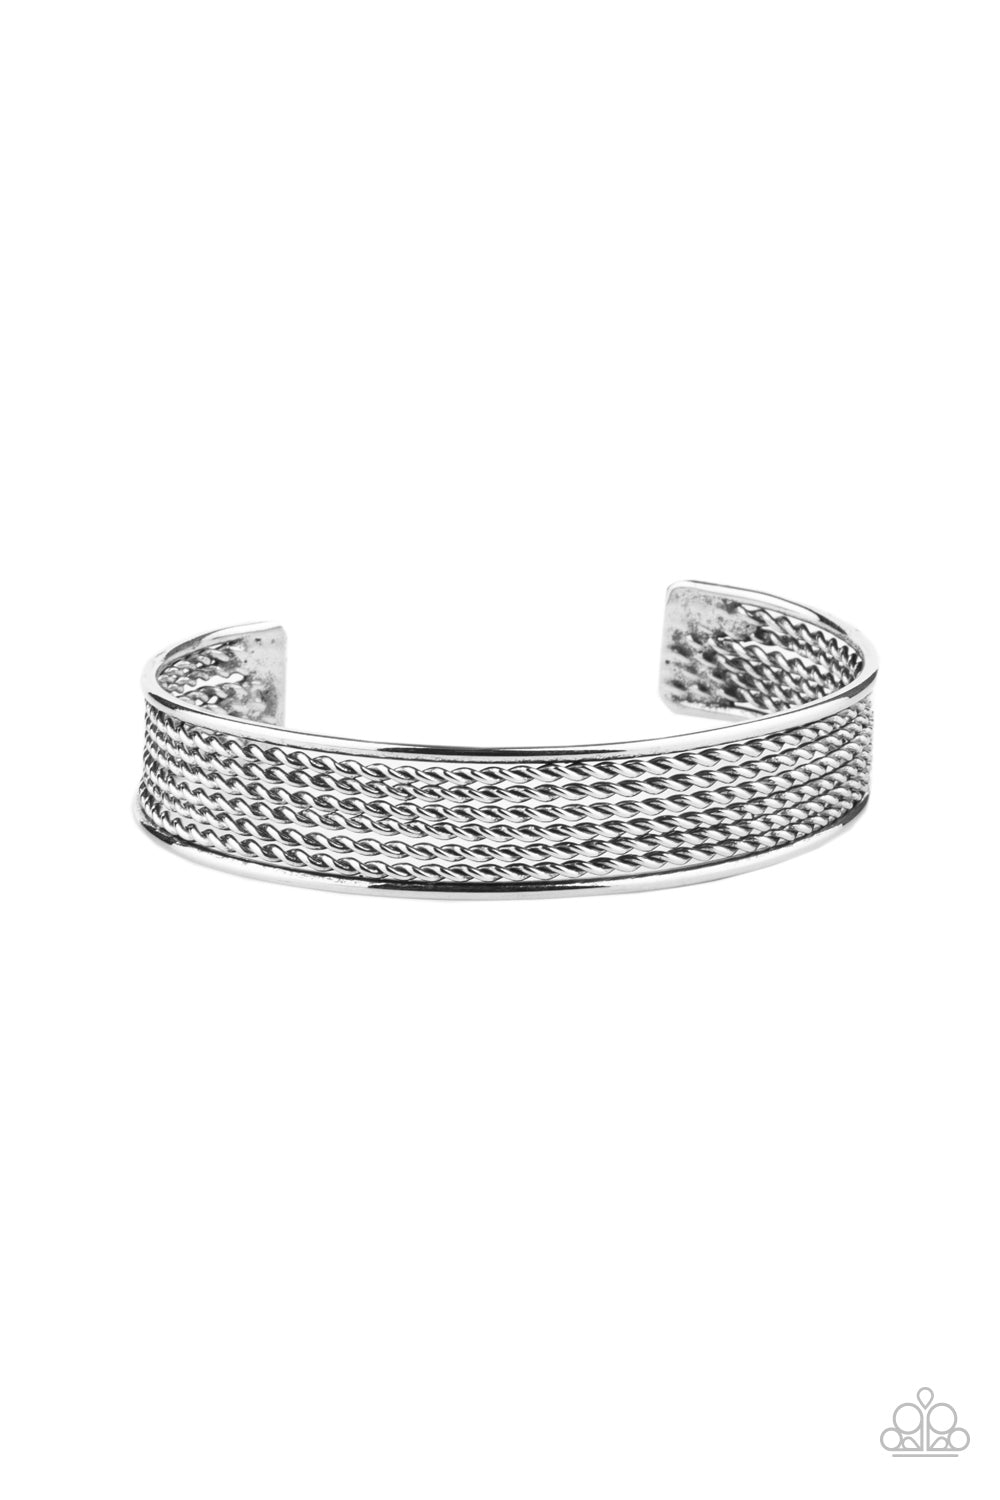 Risk-Taking Texture - Silver - The V Resale Boutique